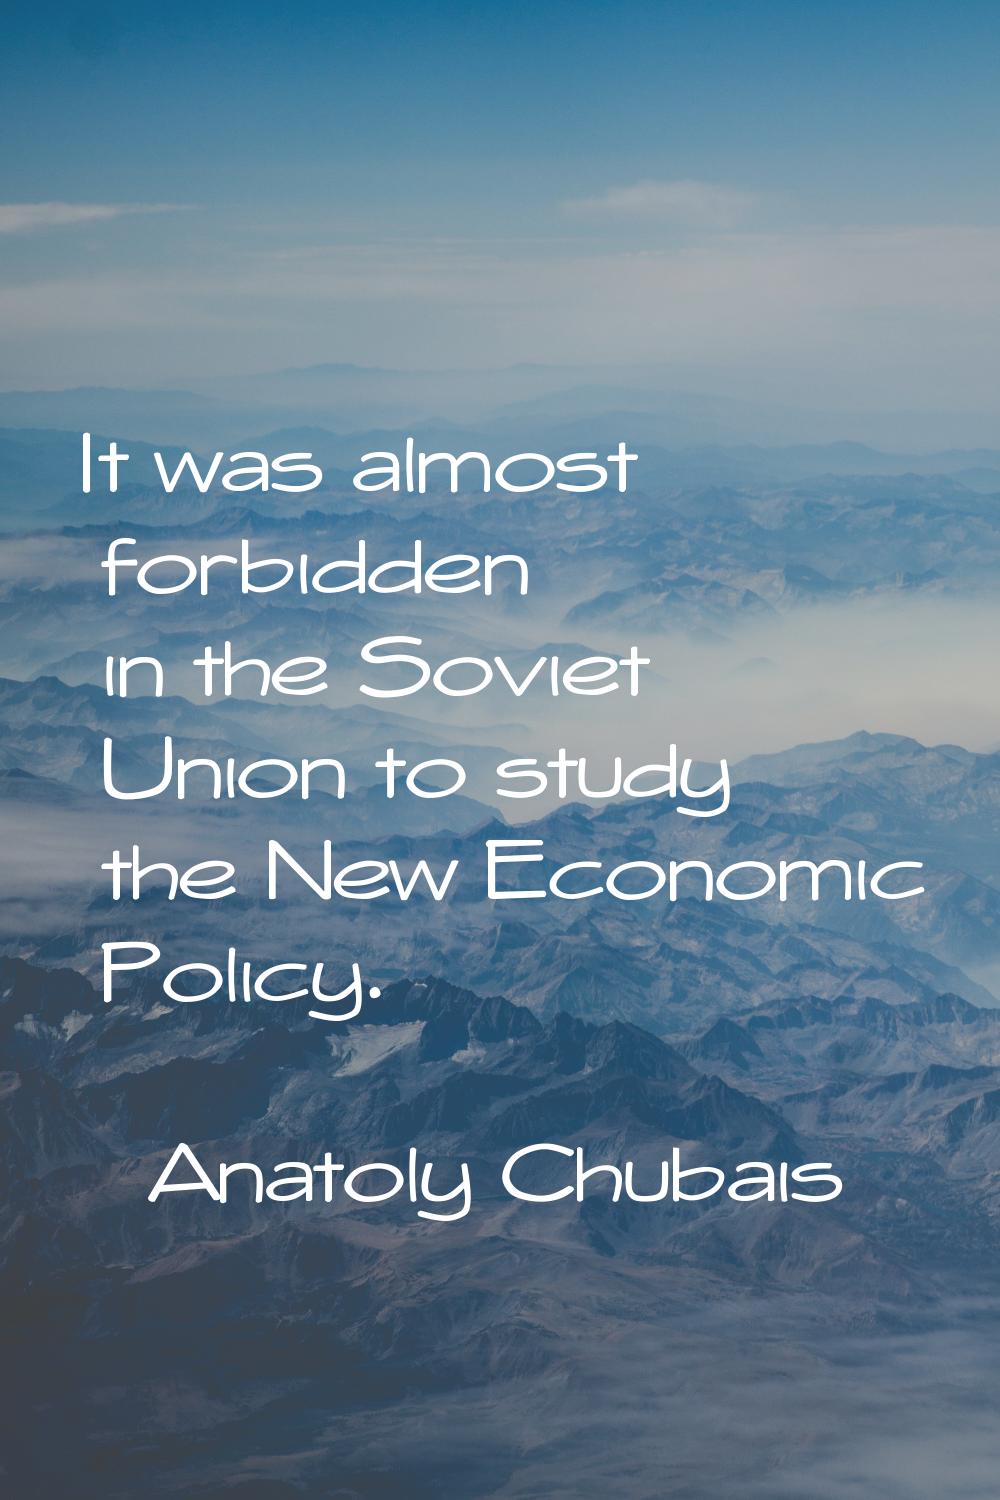 It was almost forbidden in the Soviet Union to study the New Economic Policy.